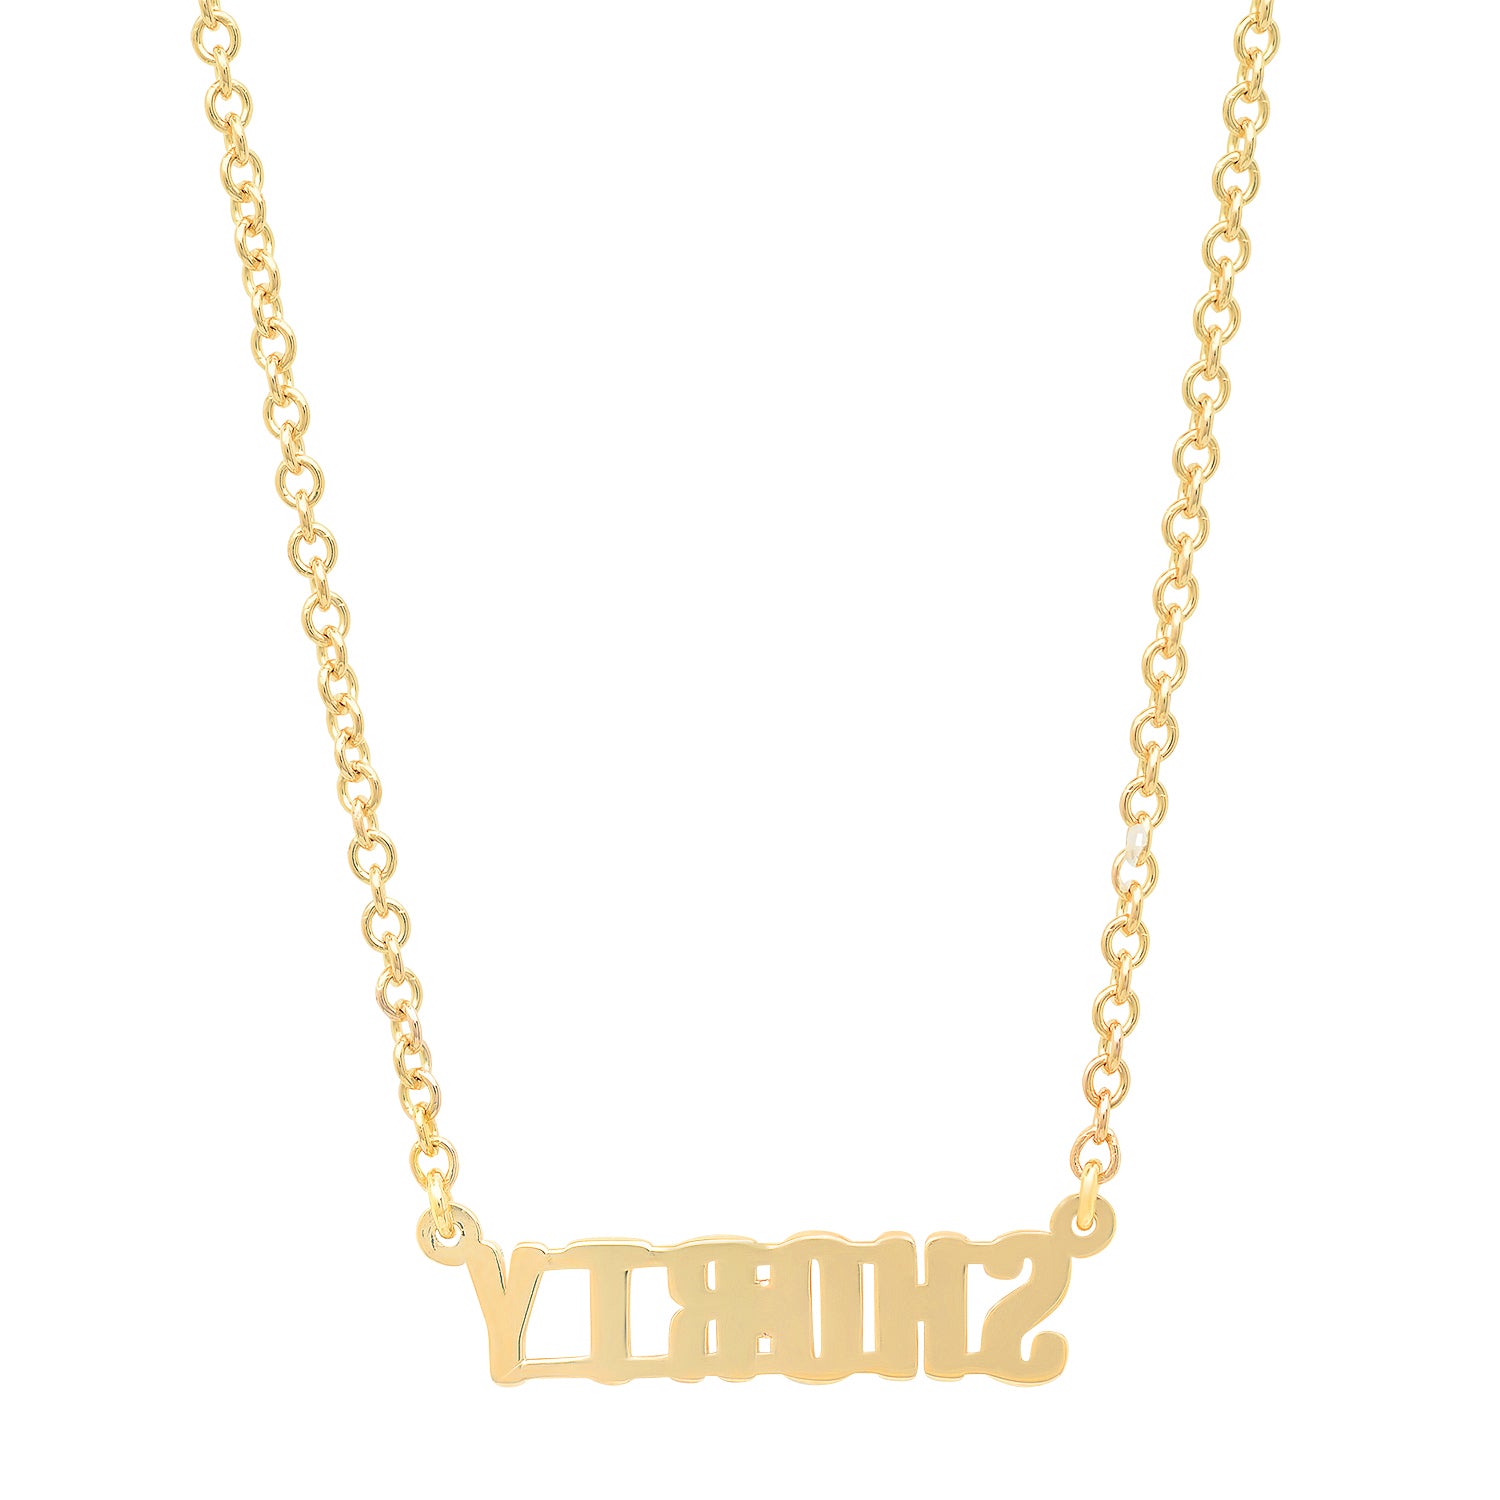 "Shorty" Necklace